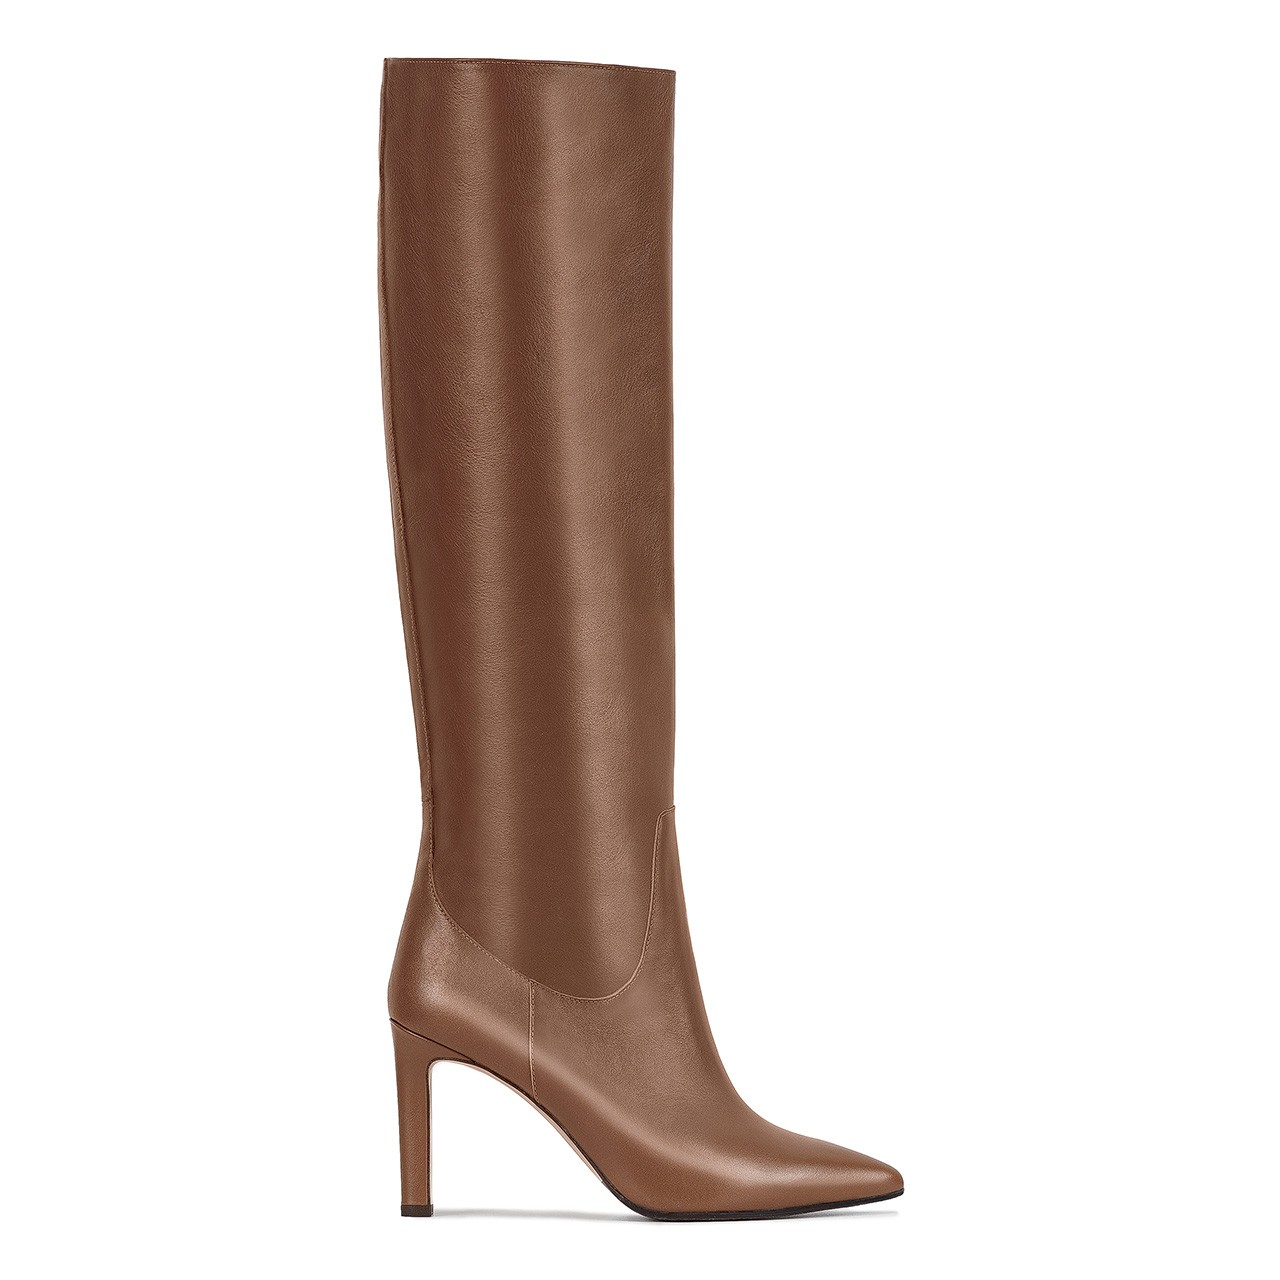 Natural grain leather, light brown high boots, boasting a 9 cm high heel